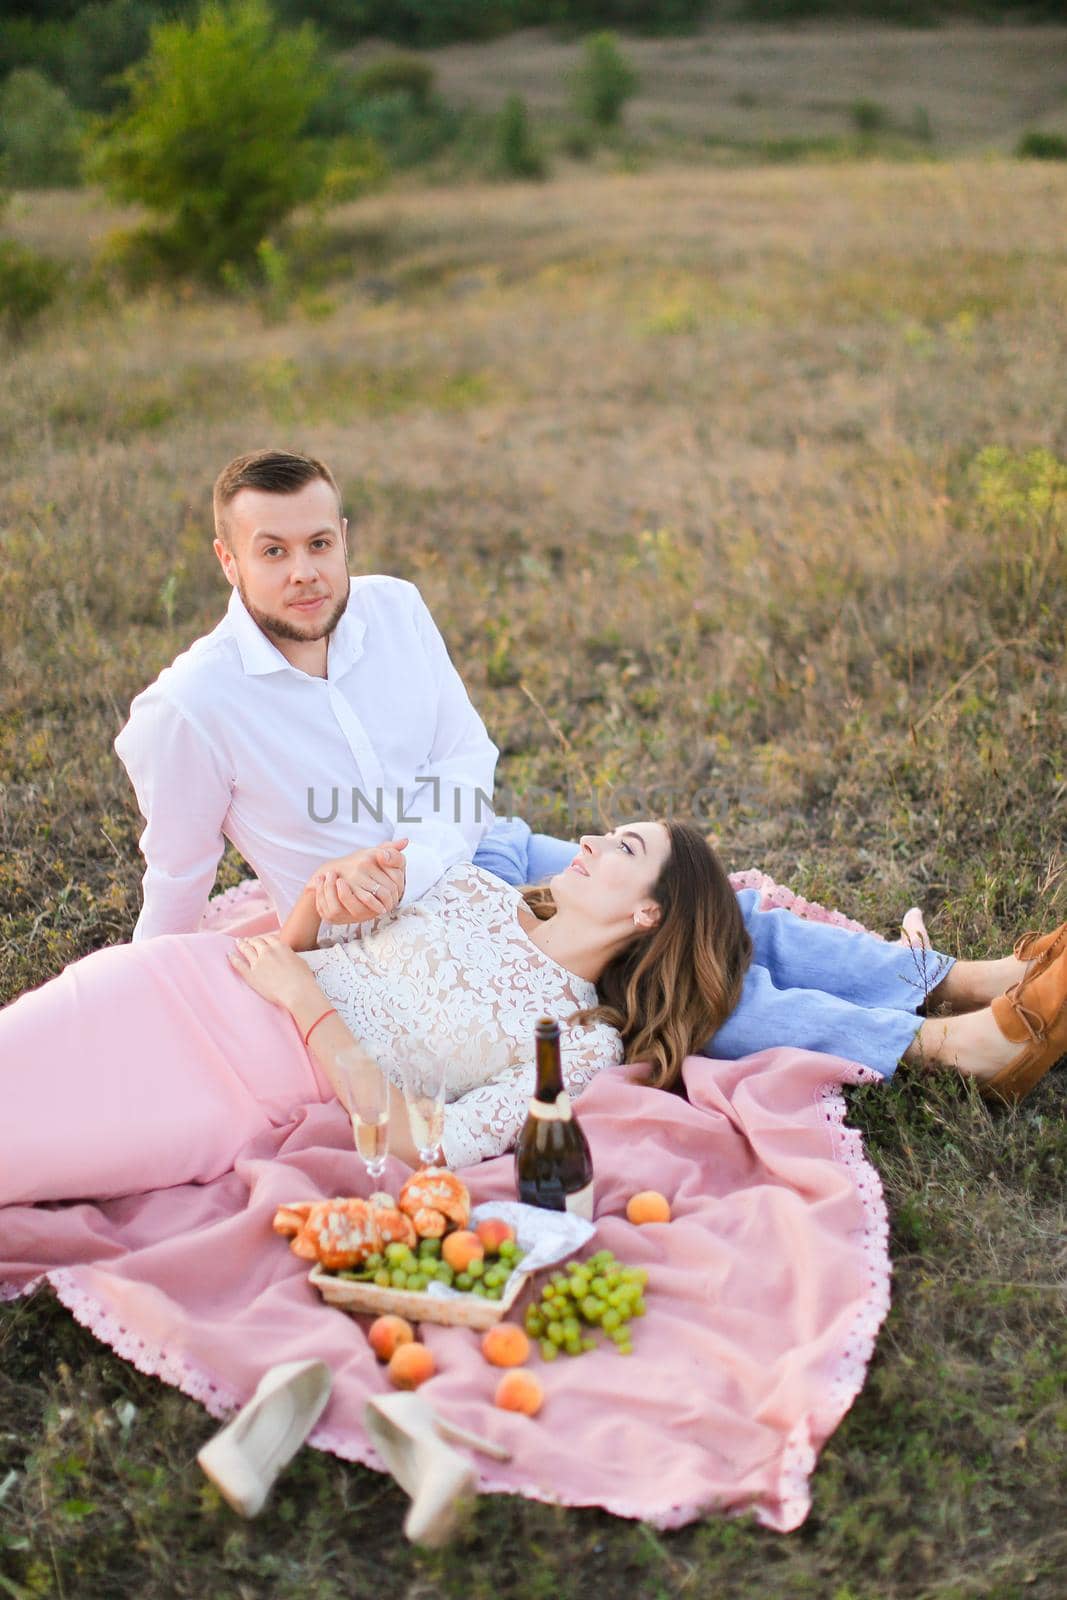 Young girl lying on man knees and pink plaid in steppe near fruits and bottle of red wine. oncept of picnic and relationship, romantic love.